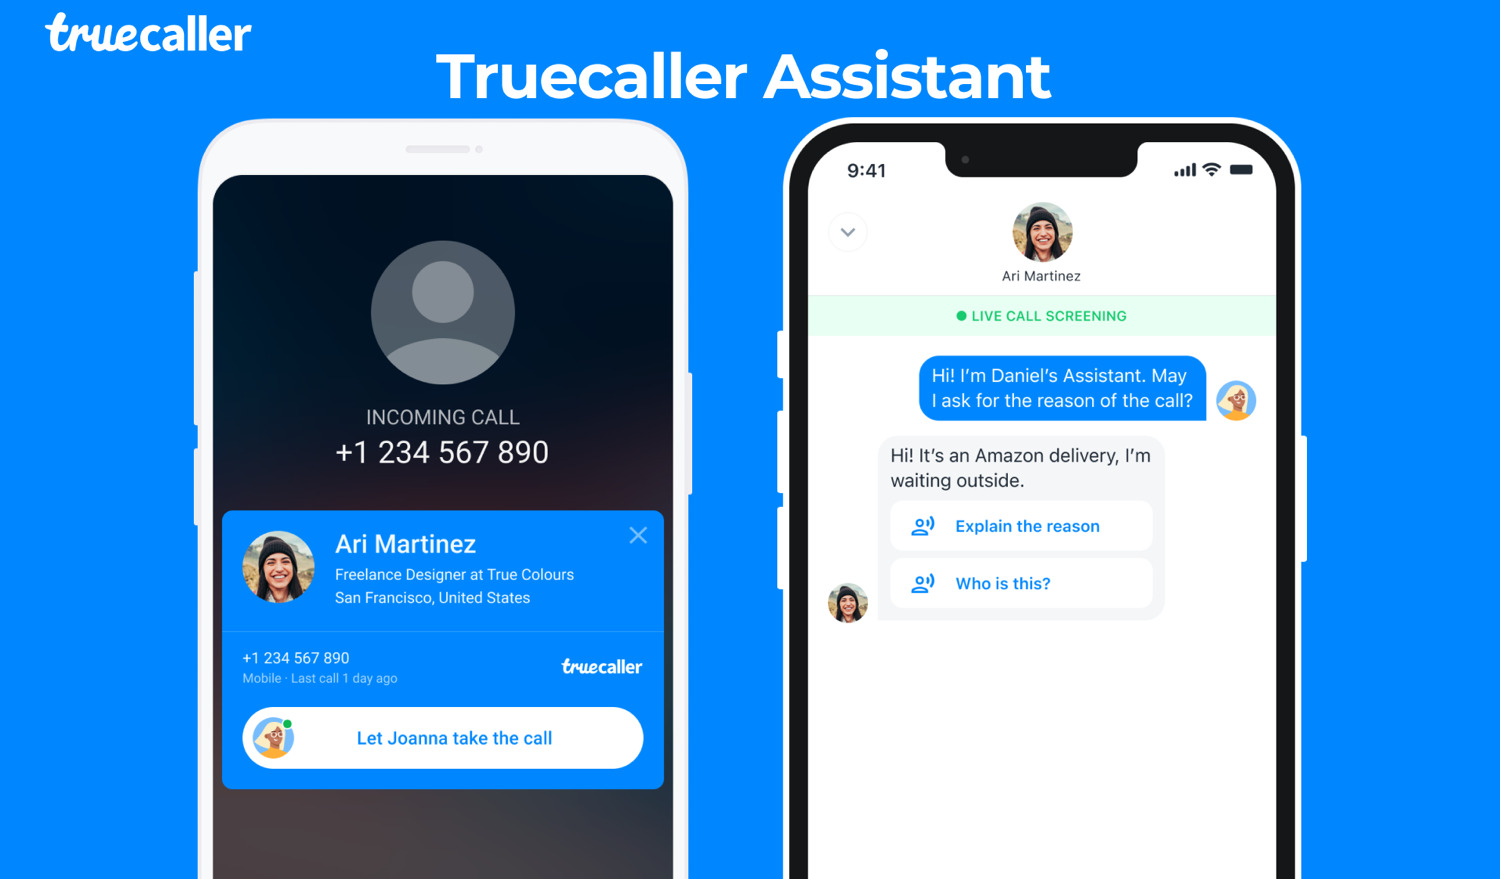 How to use Truecaller Assistant to screen spam calls?